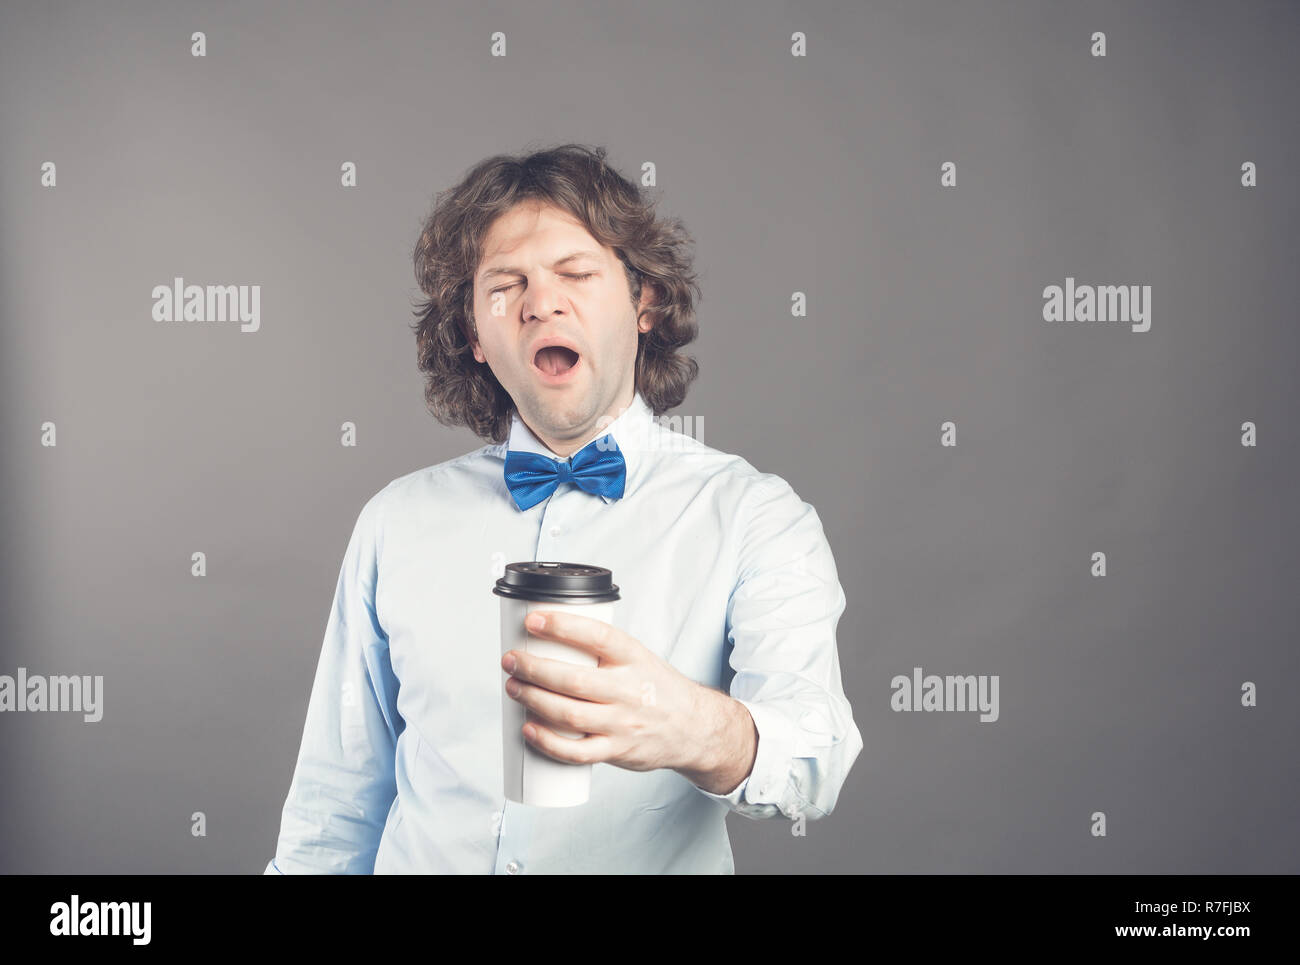 Tired guy yawns with sleepy expression and wide open mouth, holds disposable paper cup of coffee, dressed in shirt and blue bow tie poses against grey background. Morning time. Coffee break concept Stock Photo